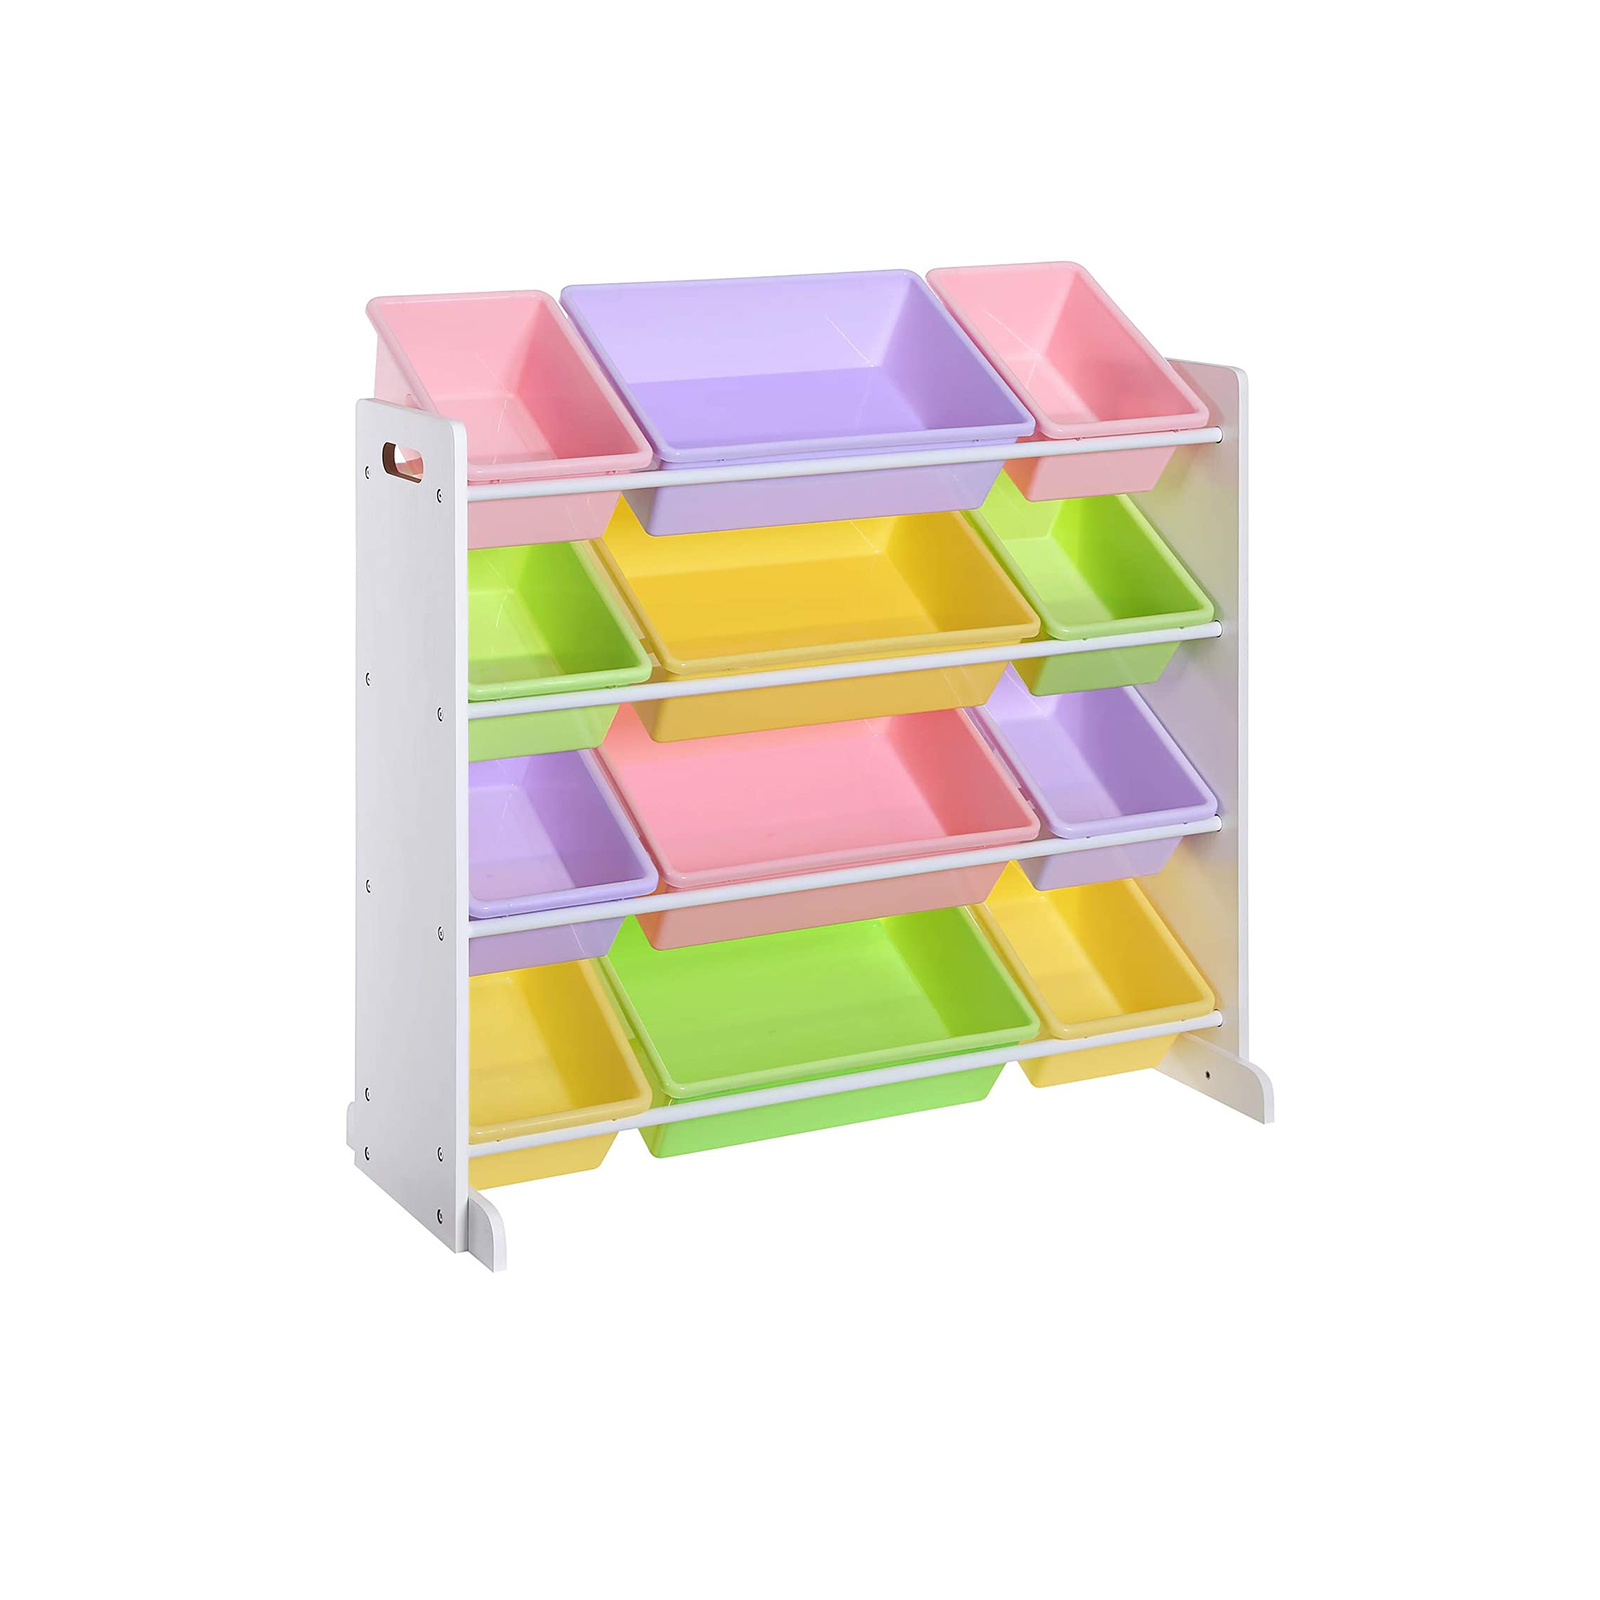 Kid’s Toy Organiser Playroom Display Stand Unit with 12 Removable PP Container Boxes in Candy Colour White SONGMICS Childrens Toy Storage Unit 86 x 26.5 x 78 cm GKR04KL 